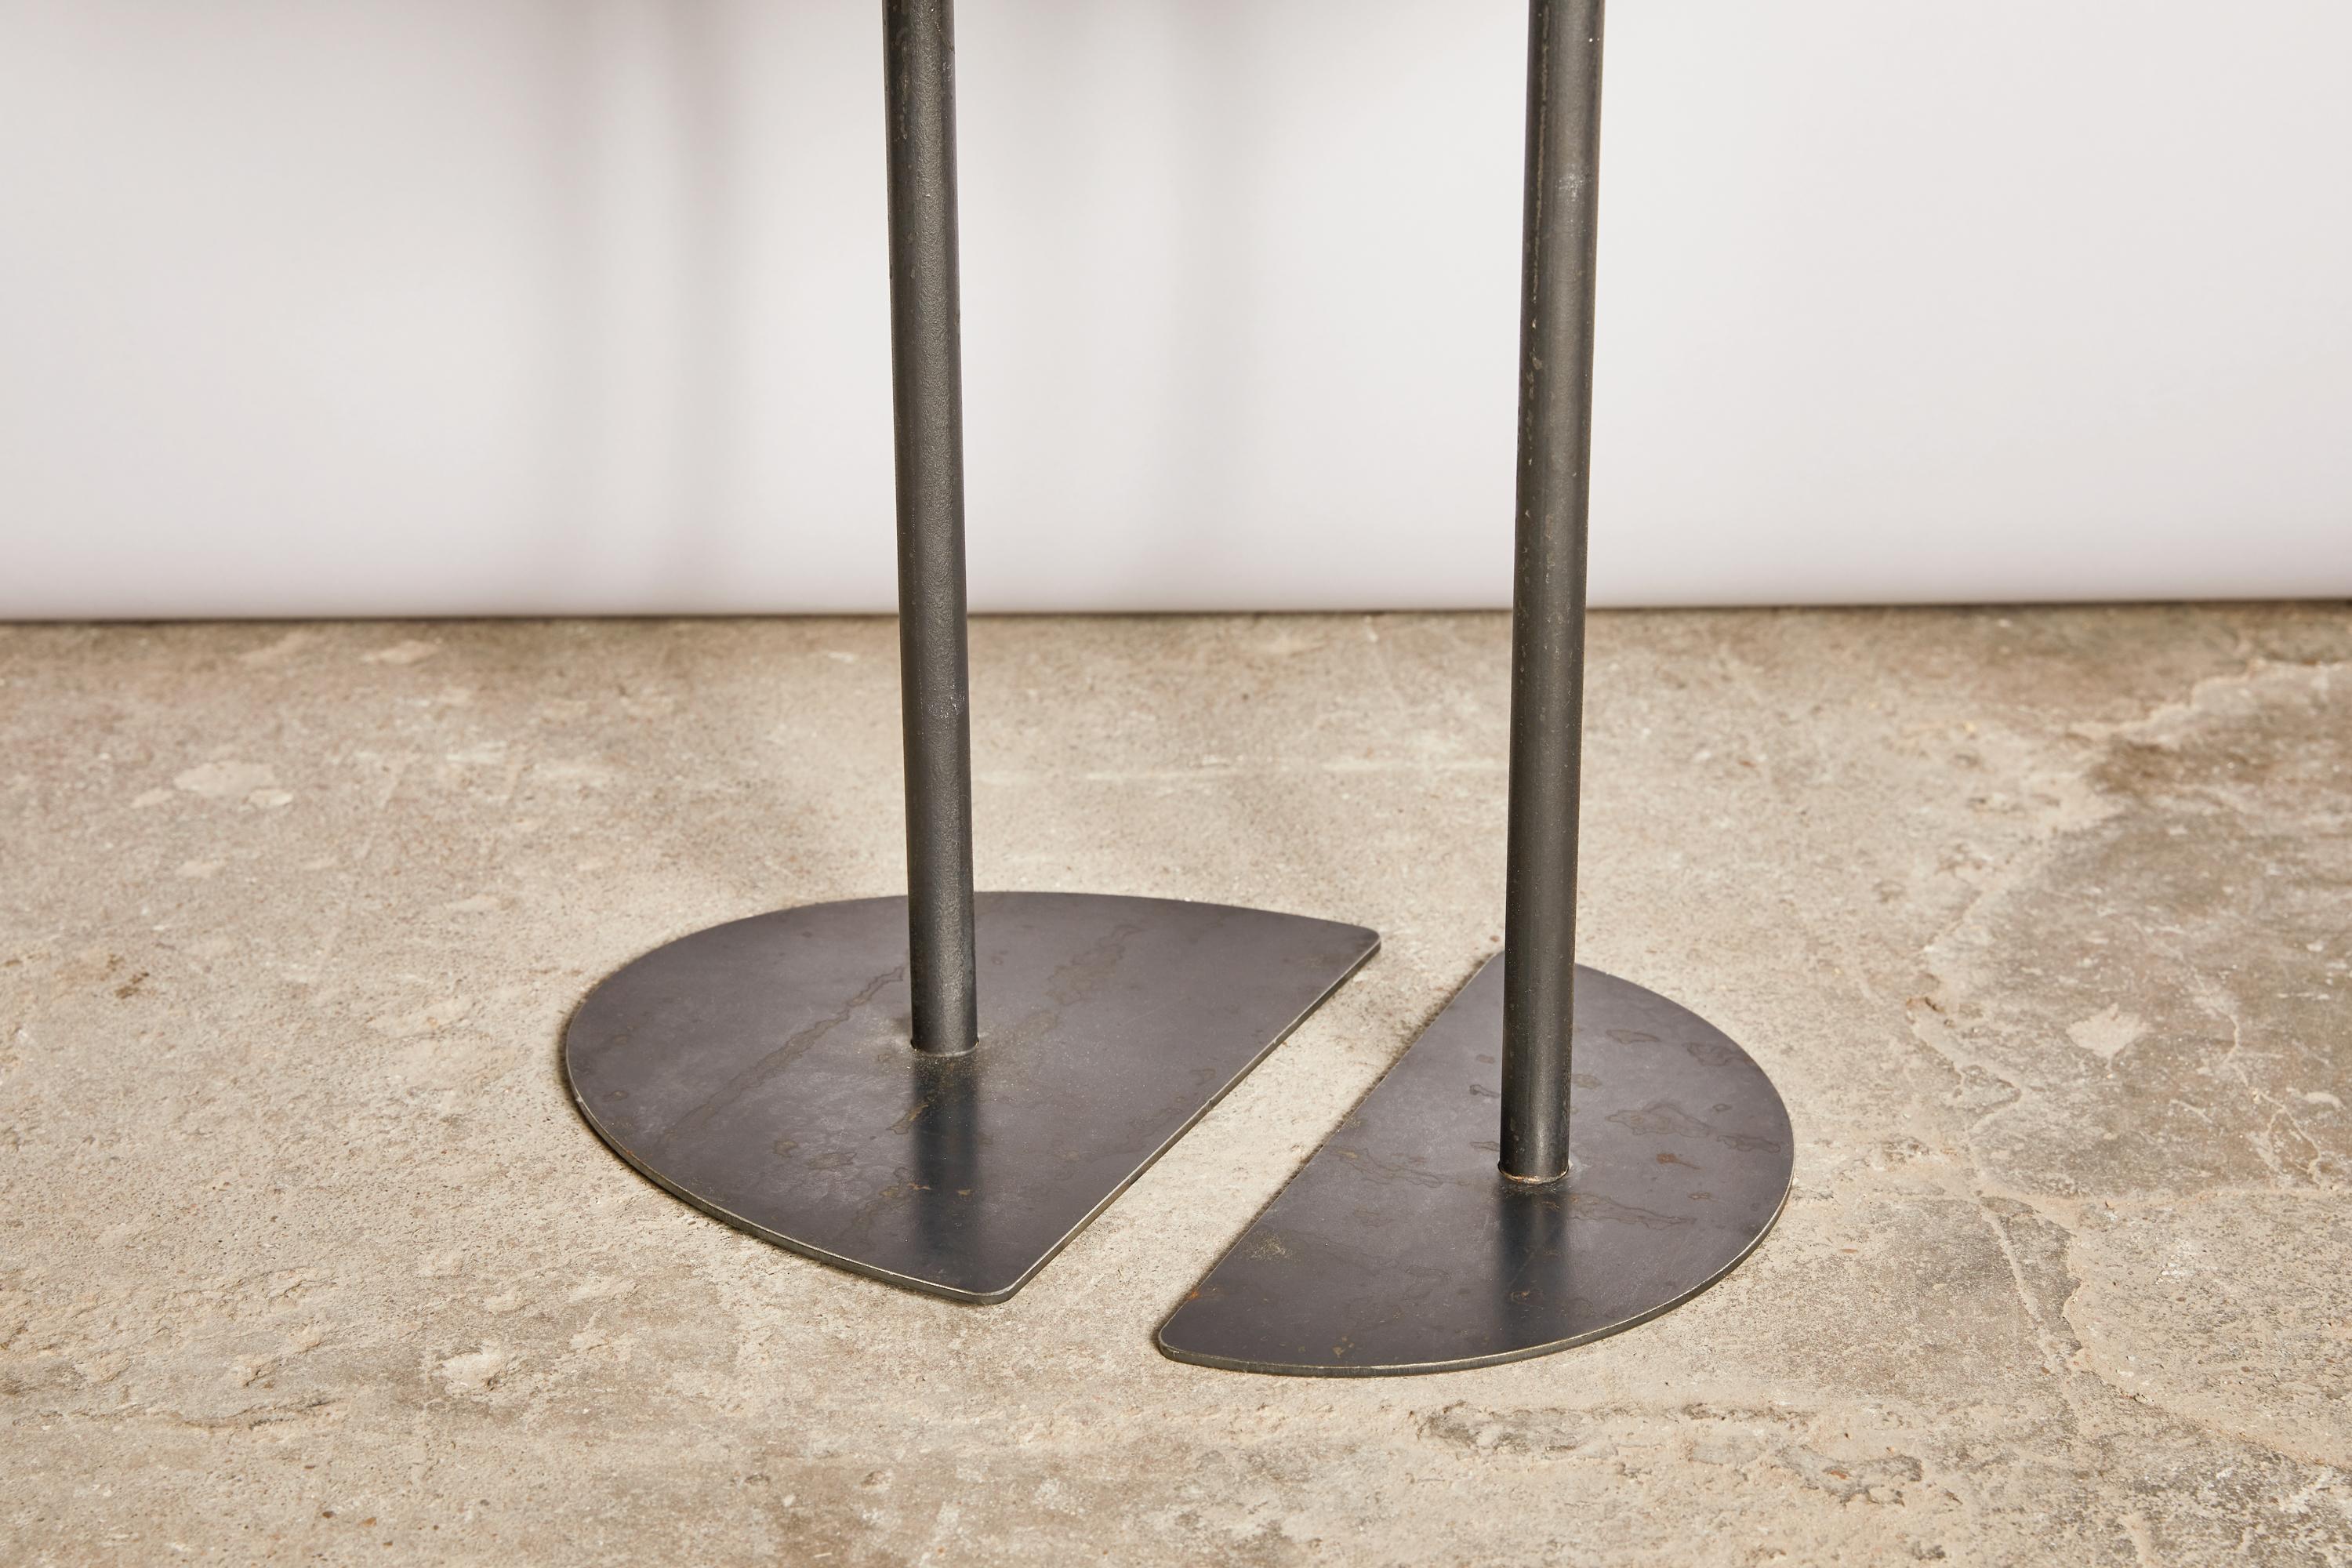 Pair of Demi-Lunes tables signed by Pia Chevalier
Also Available in Oxidized steel.
Dimensions:
Large: 60 x 27 cm H. 45 cm
Small: 40 x 18 cm H. 40 cm

Pia Chevalier is a French contemporary designer.
Independent Designer, trained in Design and